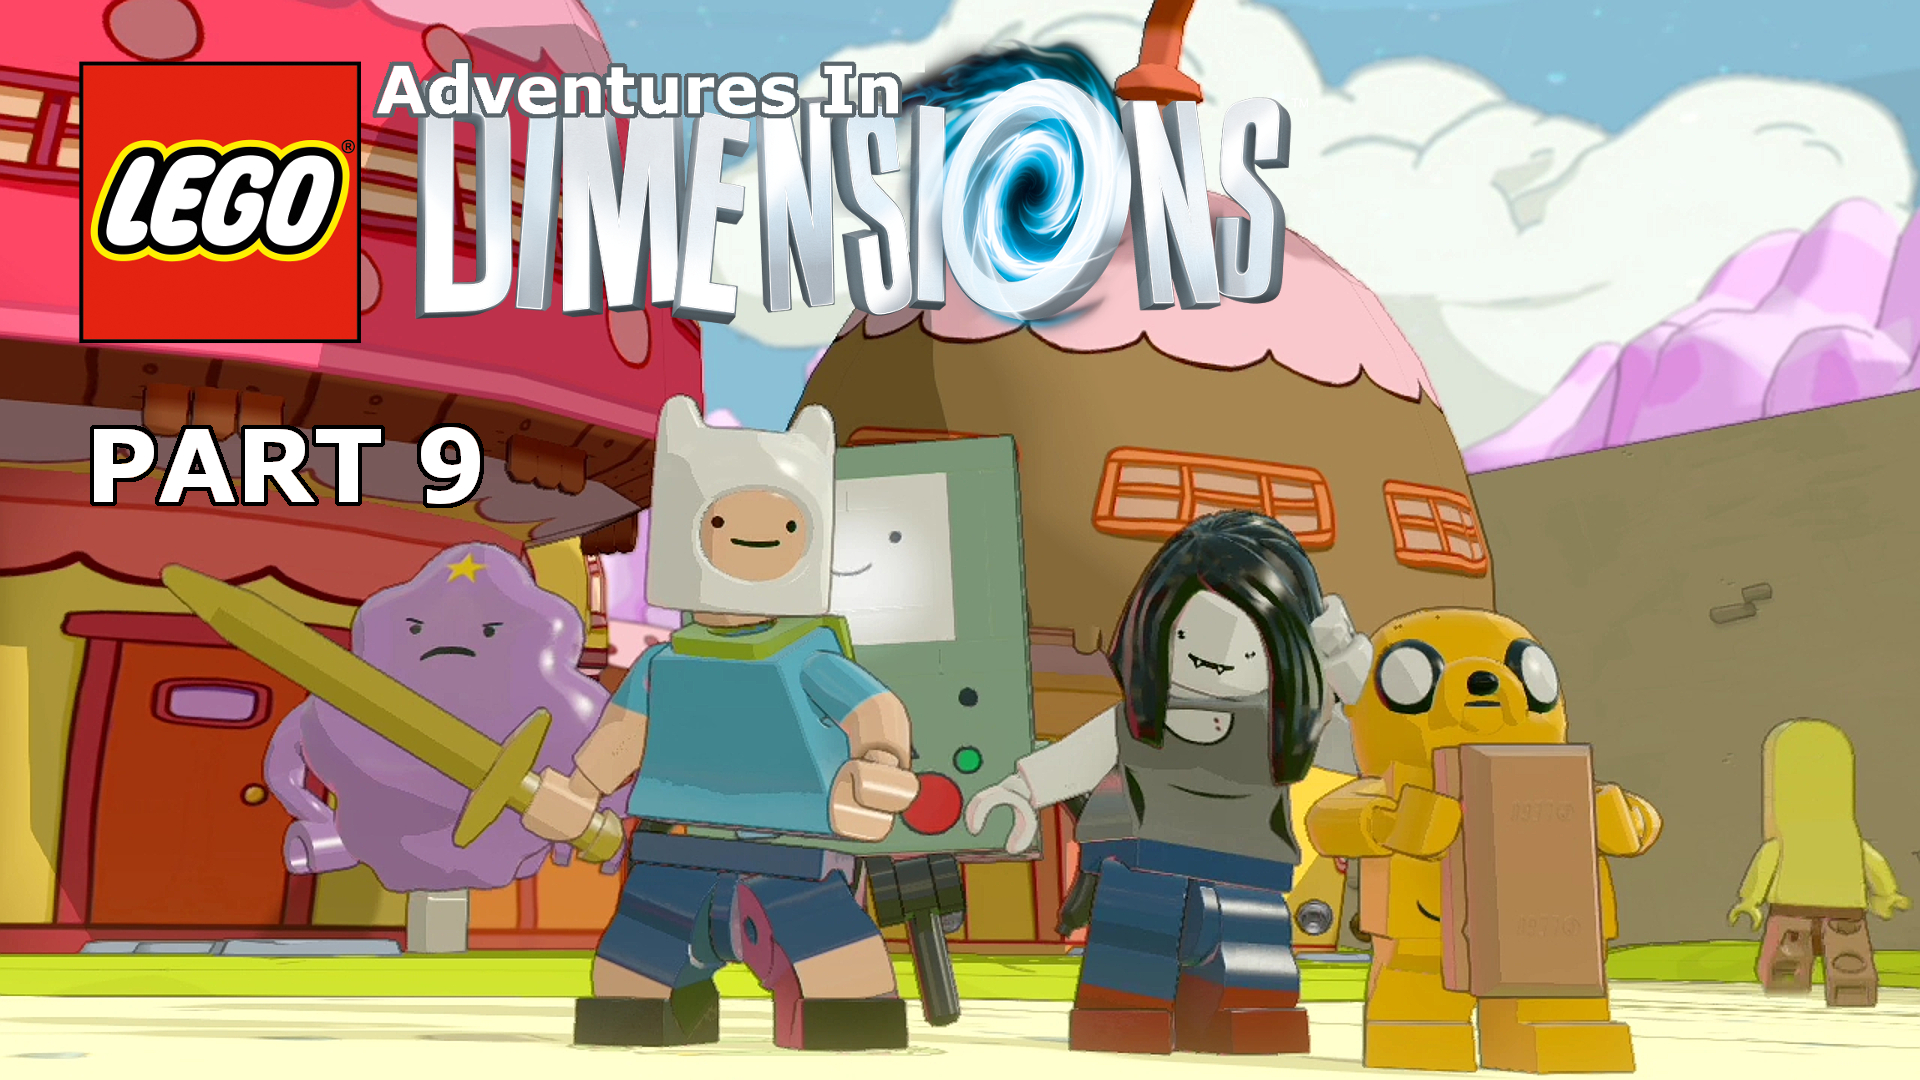 Adventures in LEGO Dimensions Episode 9 - Adventure Time World